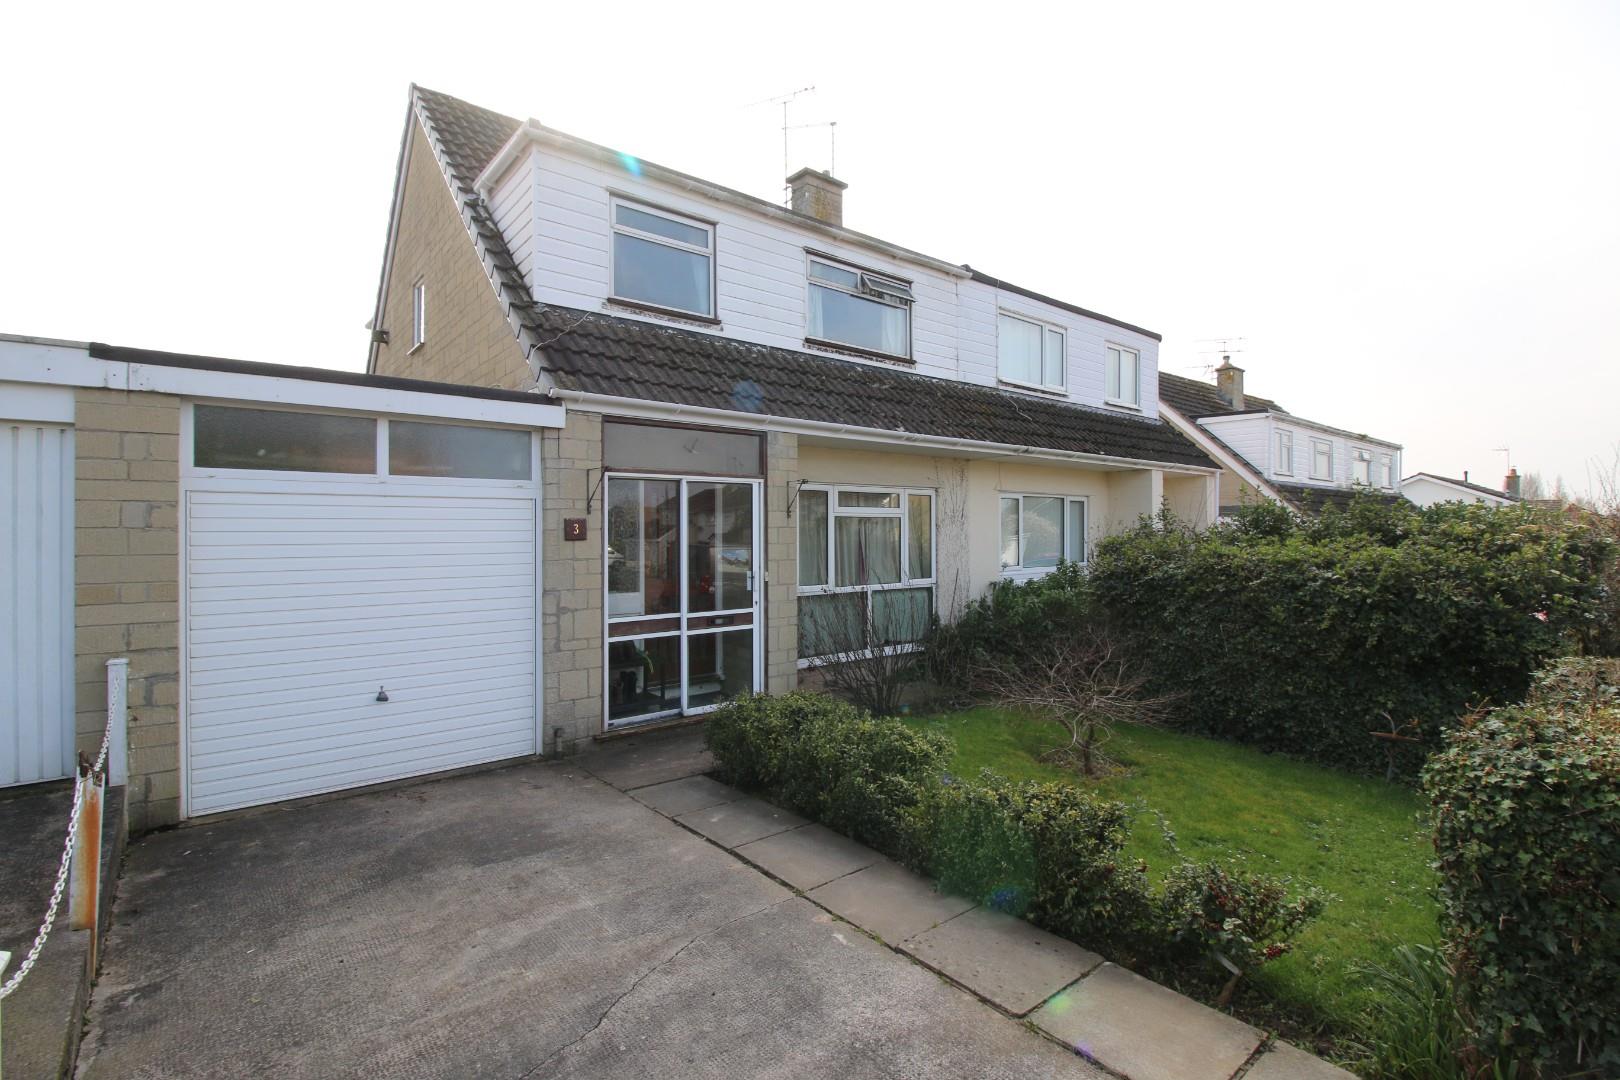 Ideally situated in the popular village of Congresbury